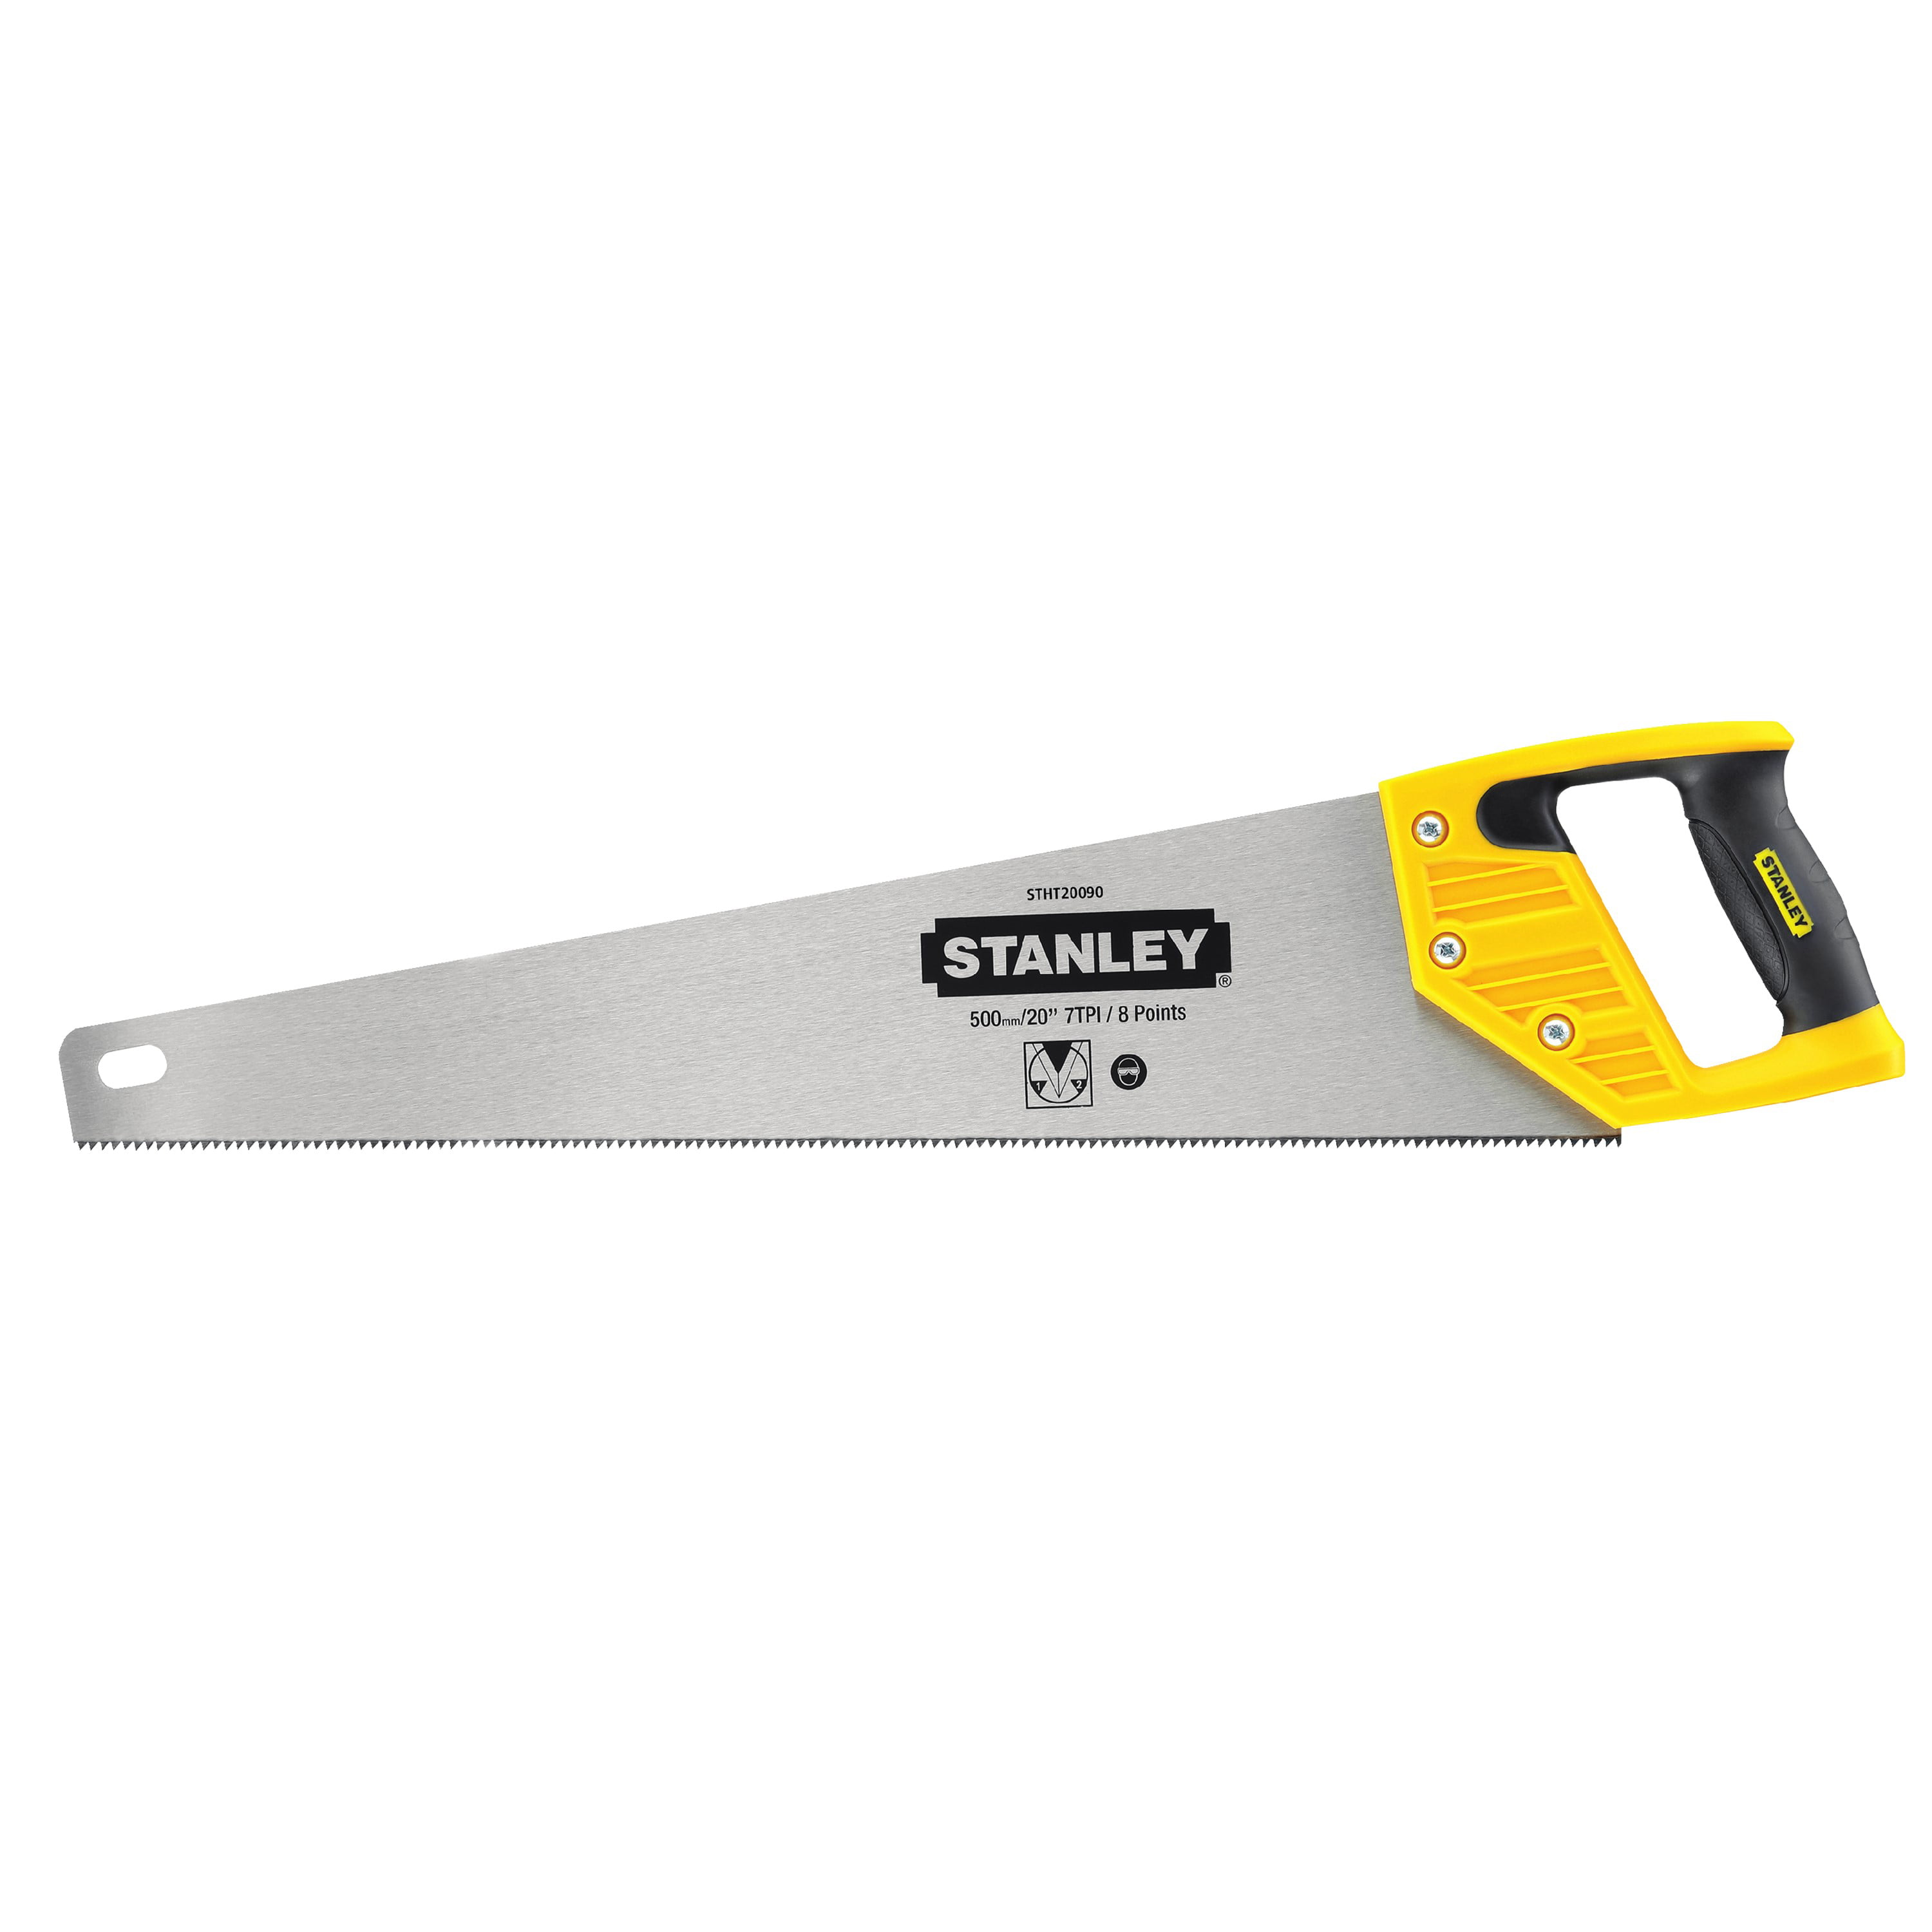 Stanley Trade Cut 20 in. Tooth Saw STHT20350 - The Home Depot